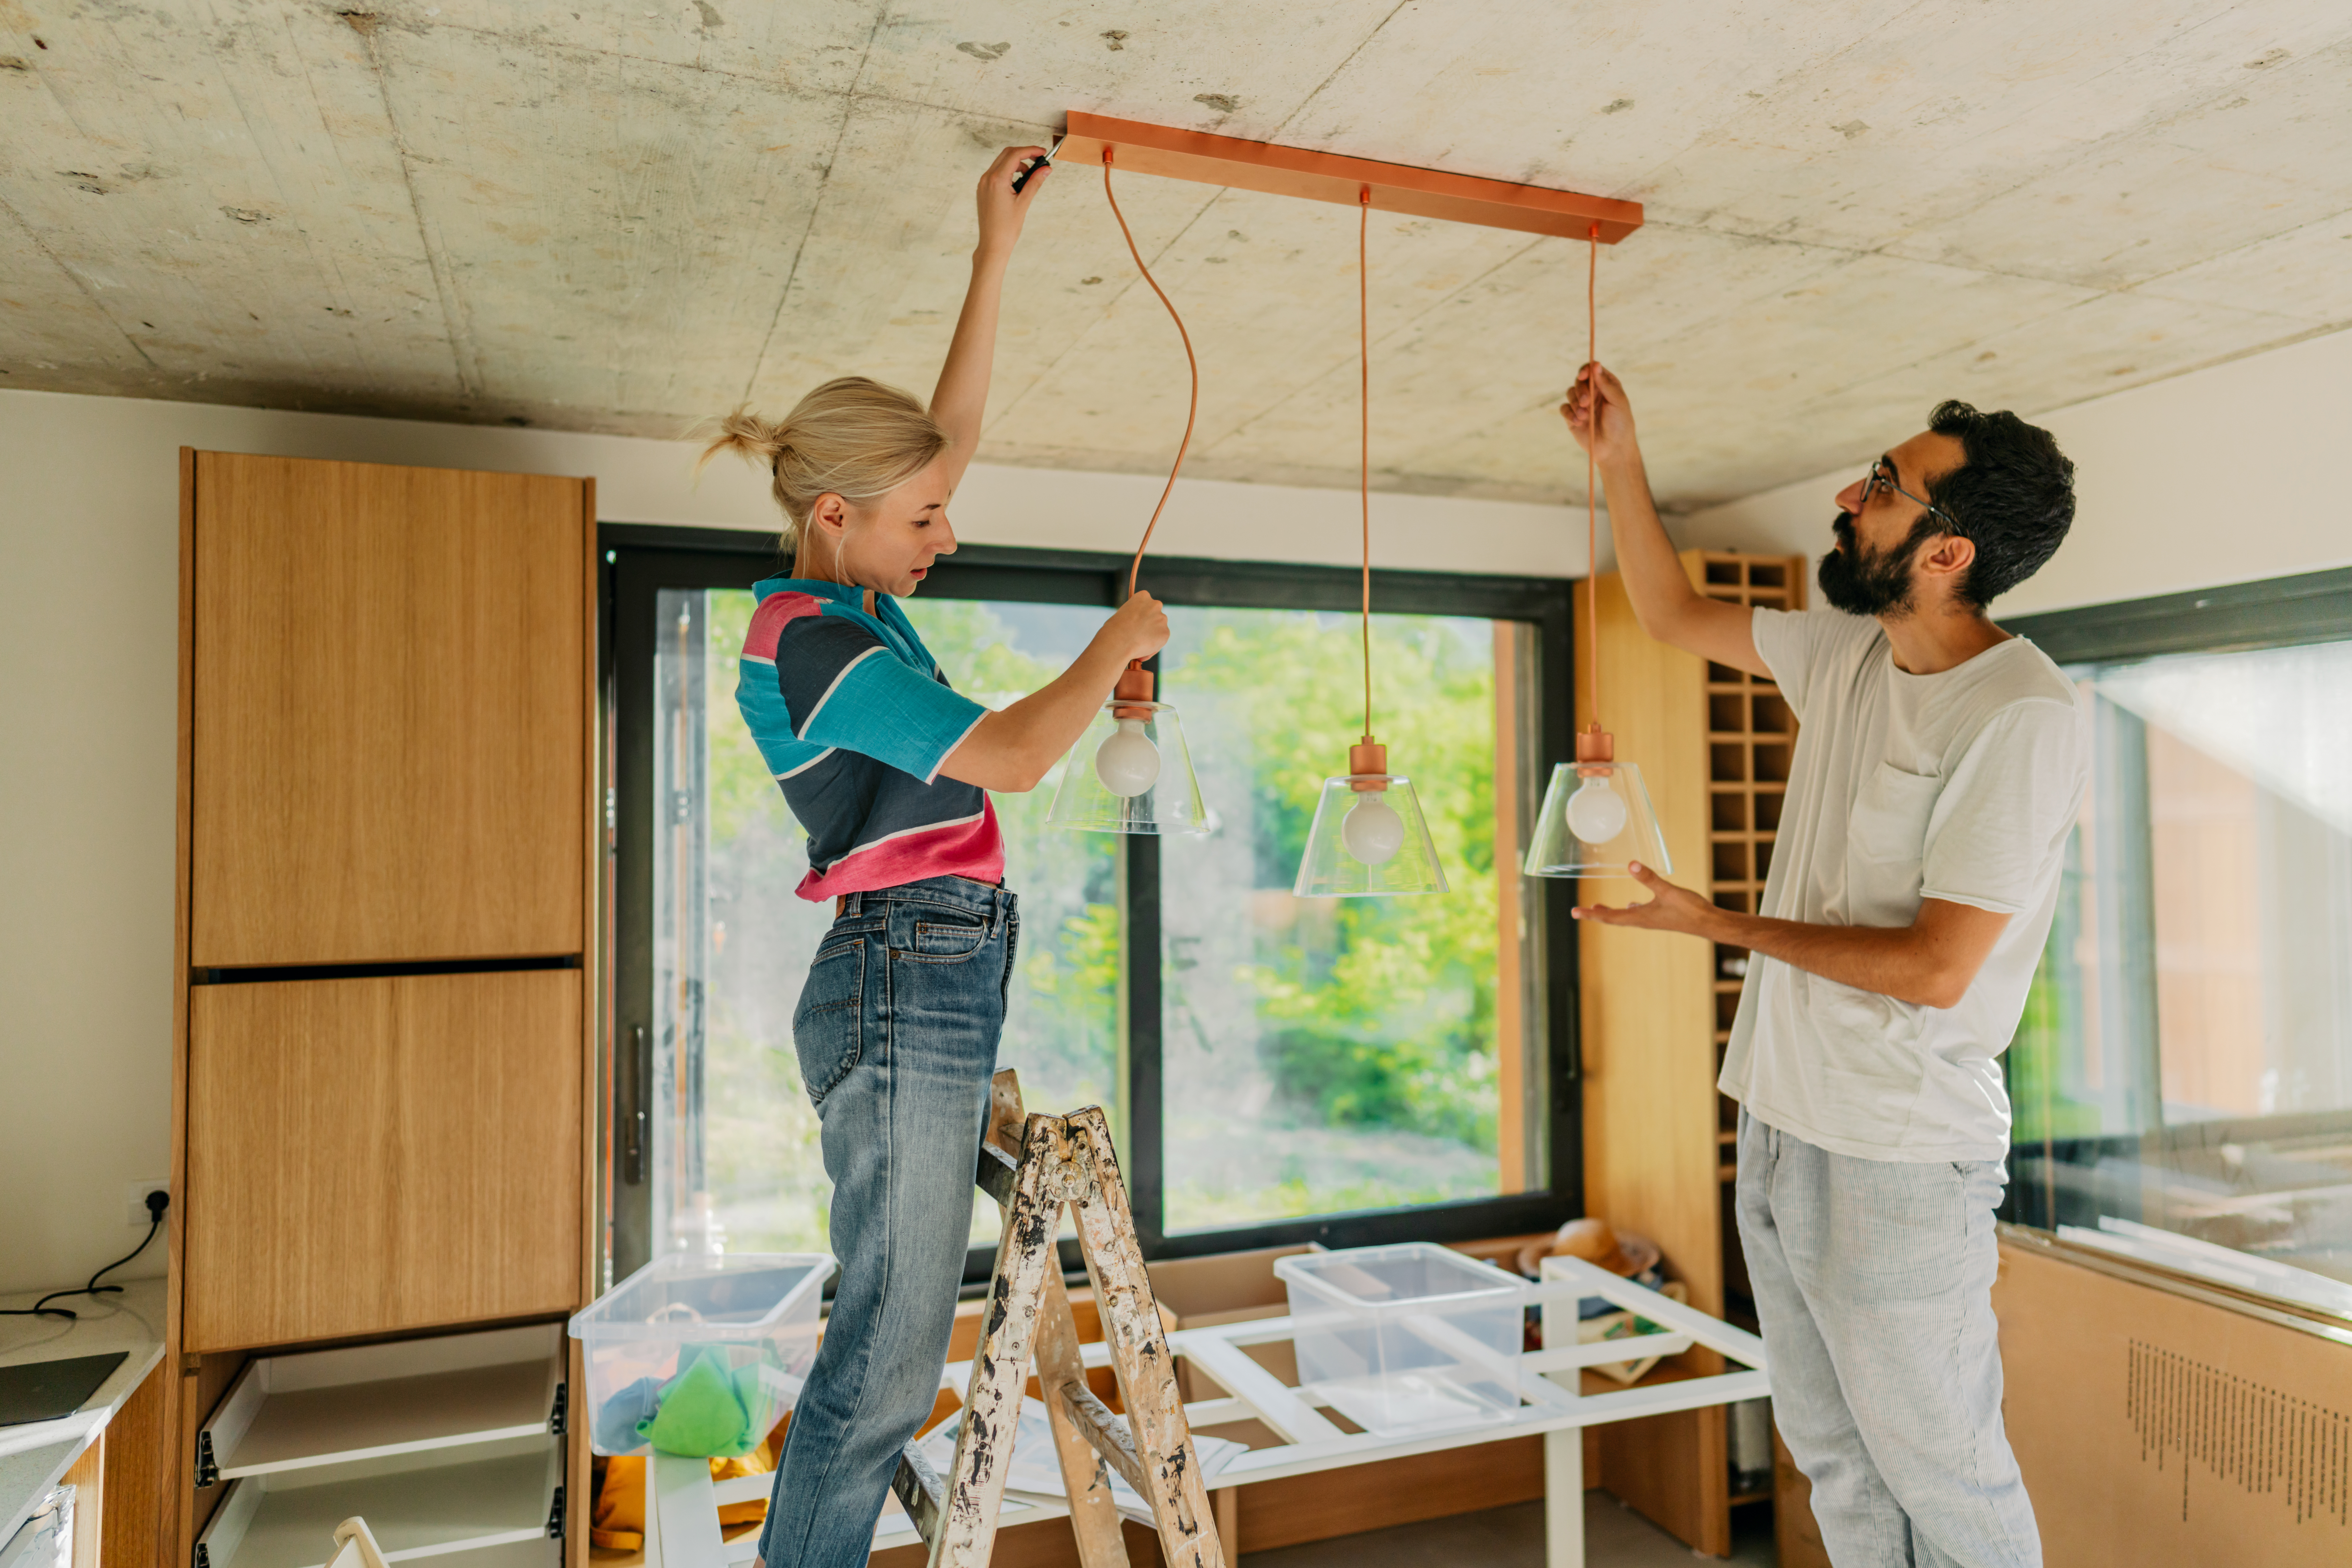 Home Equity Can Fund Your Home Improvement Project